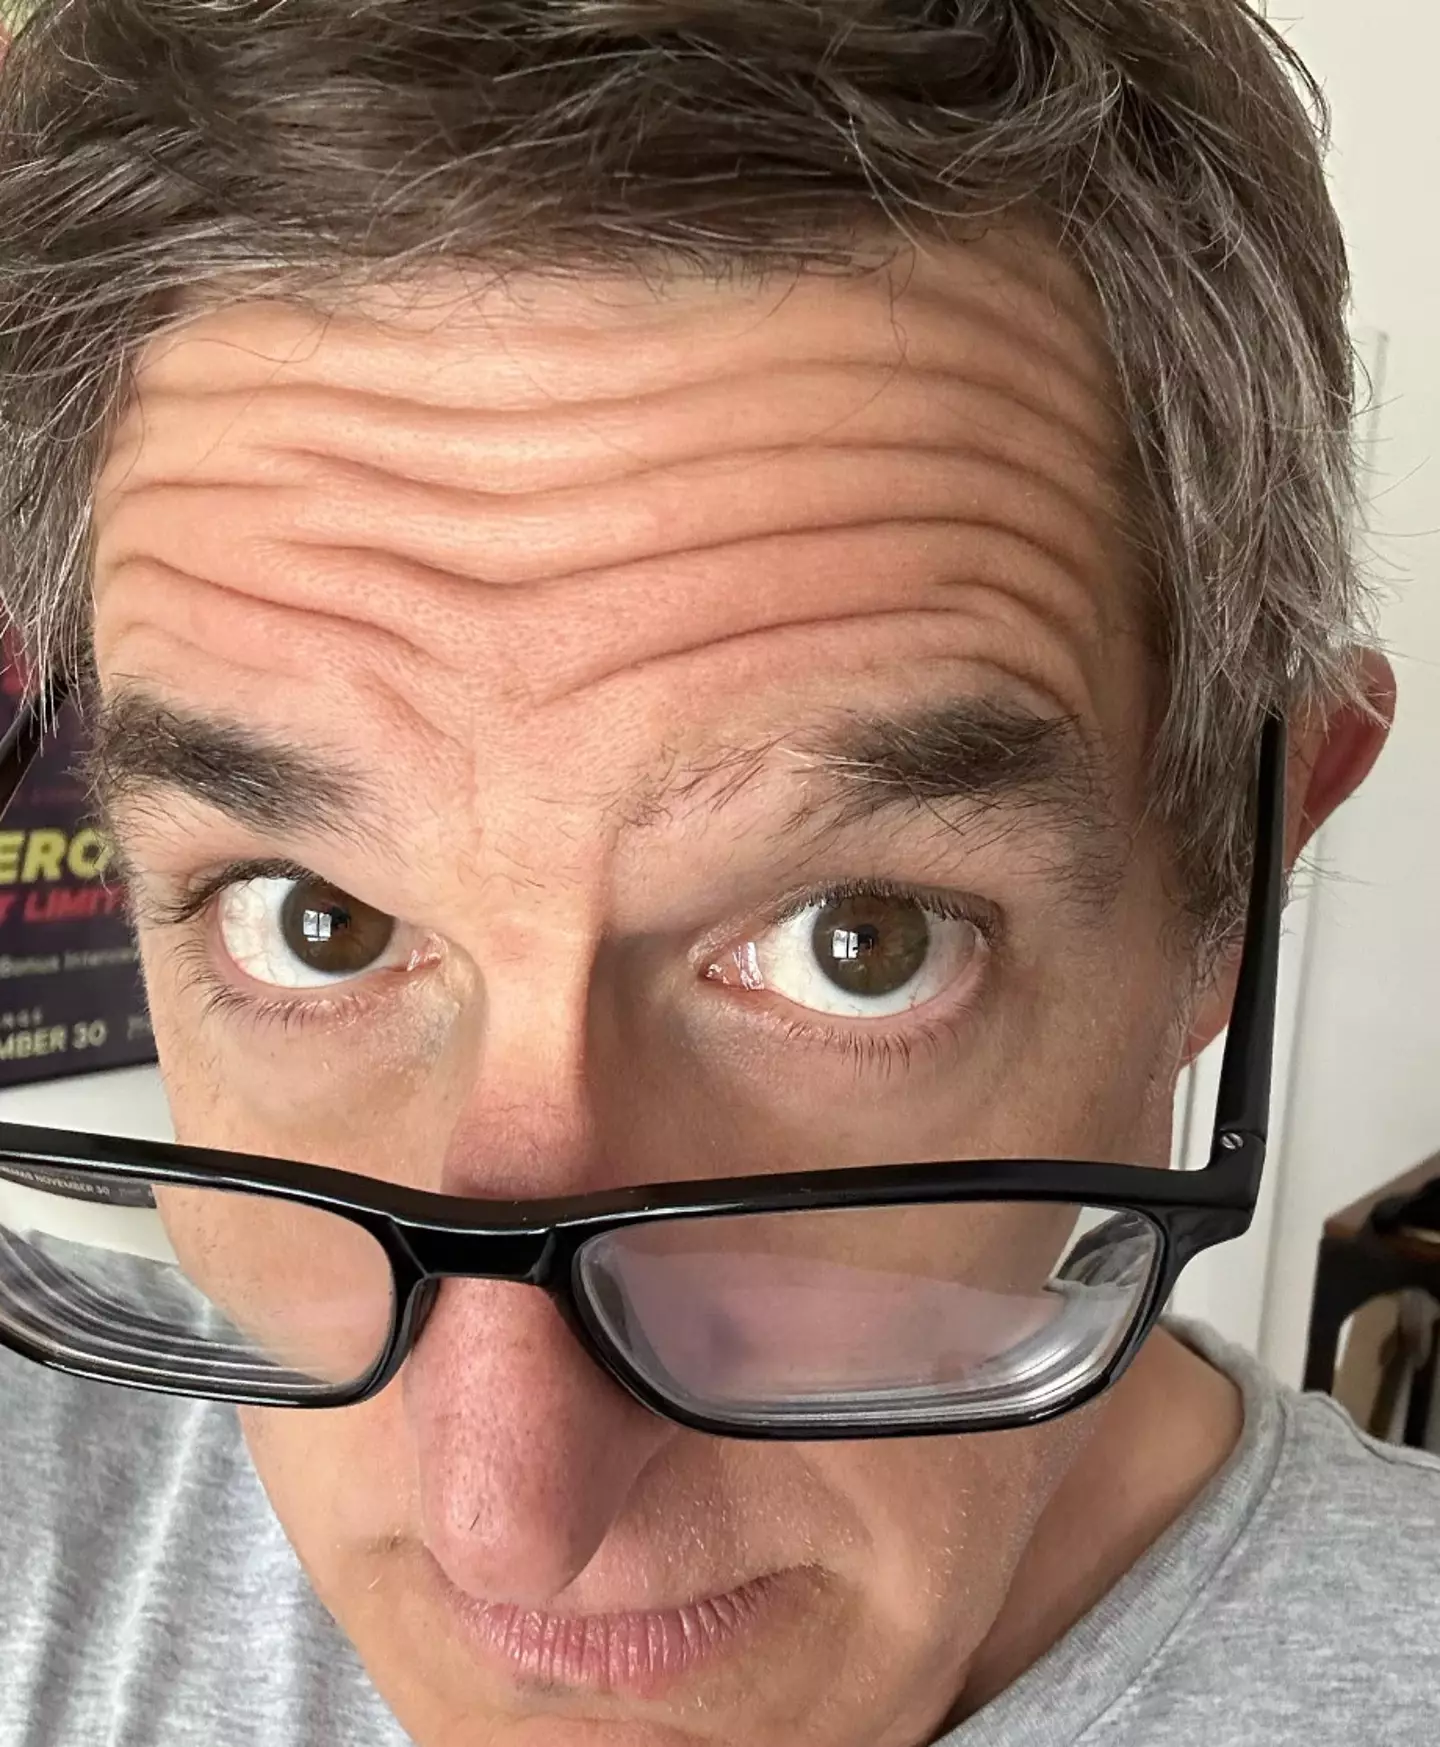 In July, Theroux shared a selfie showing hair loss to his eyebrow.